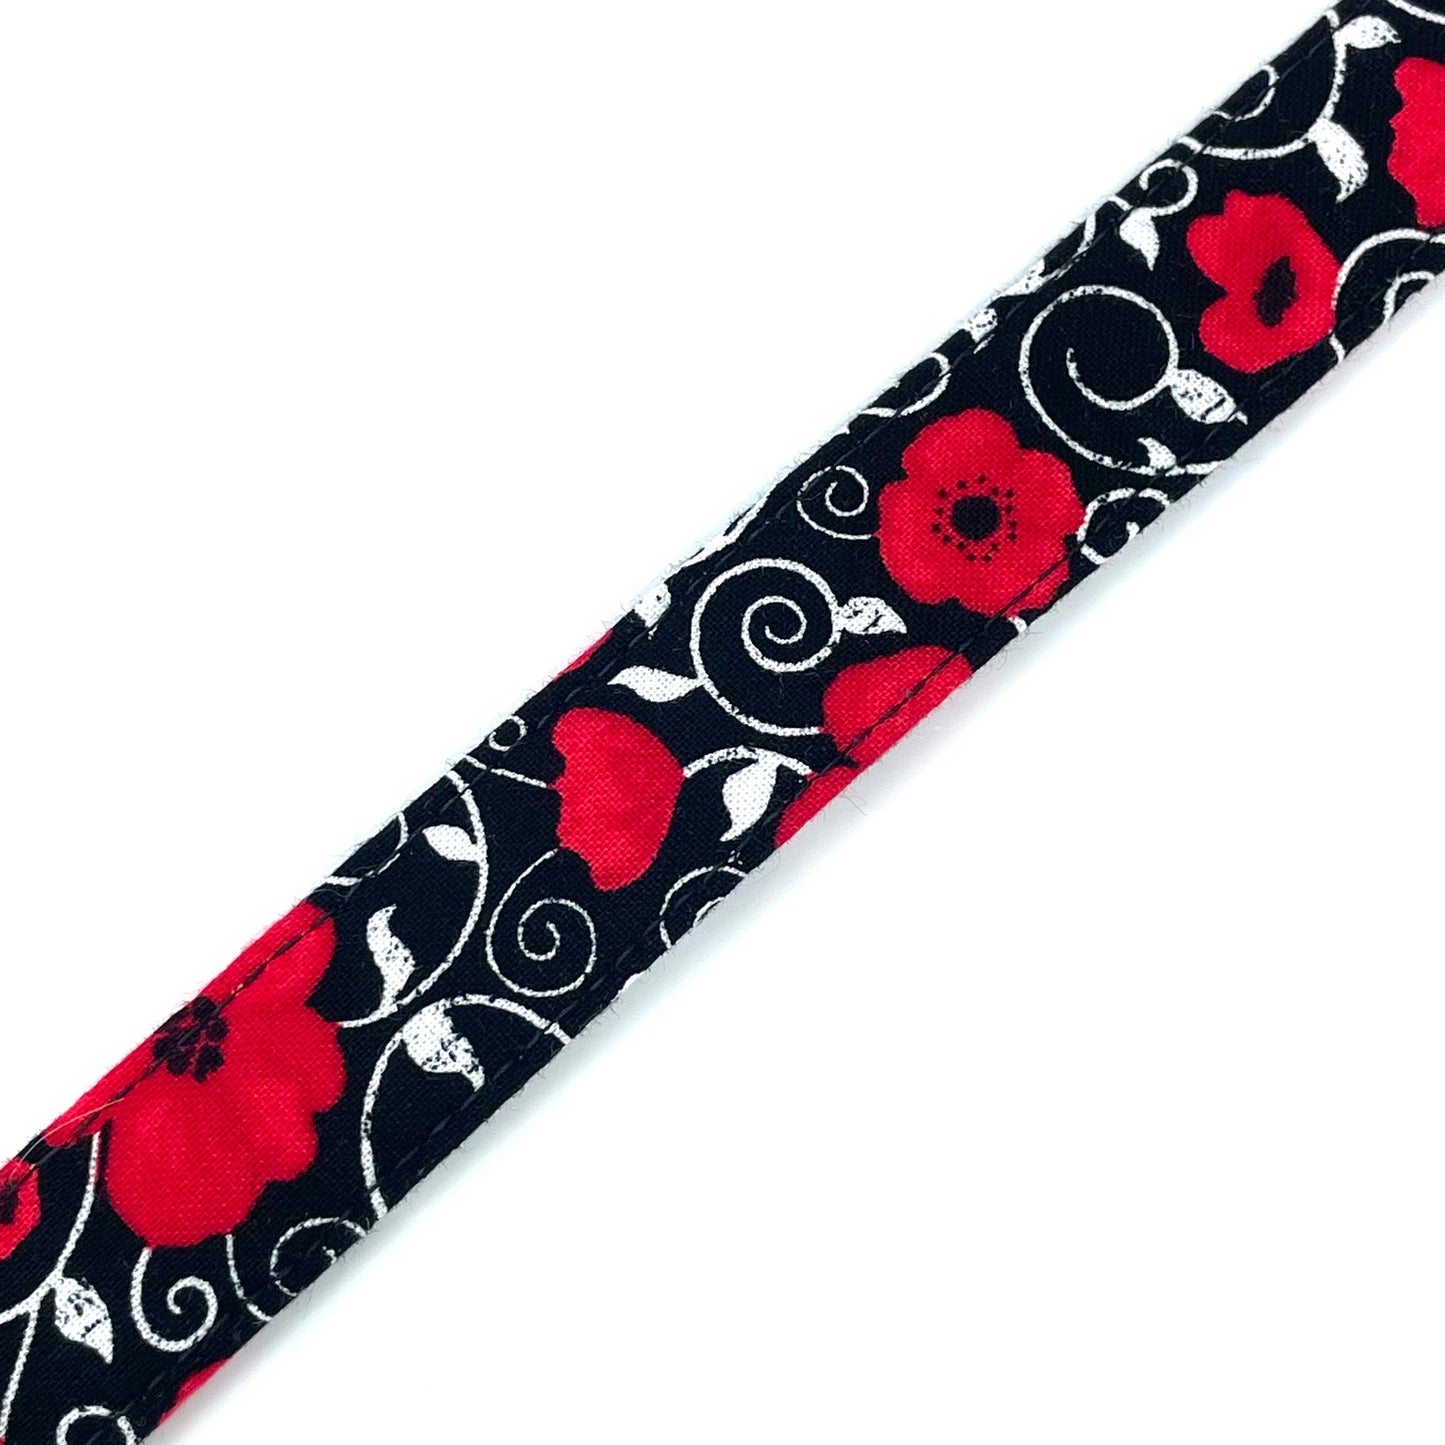 Passiondale Poppy Dog Lead